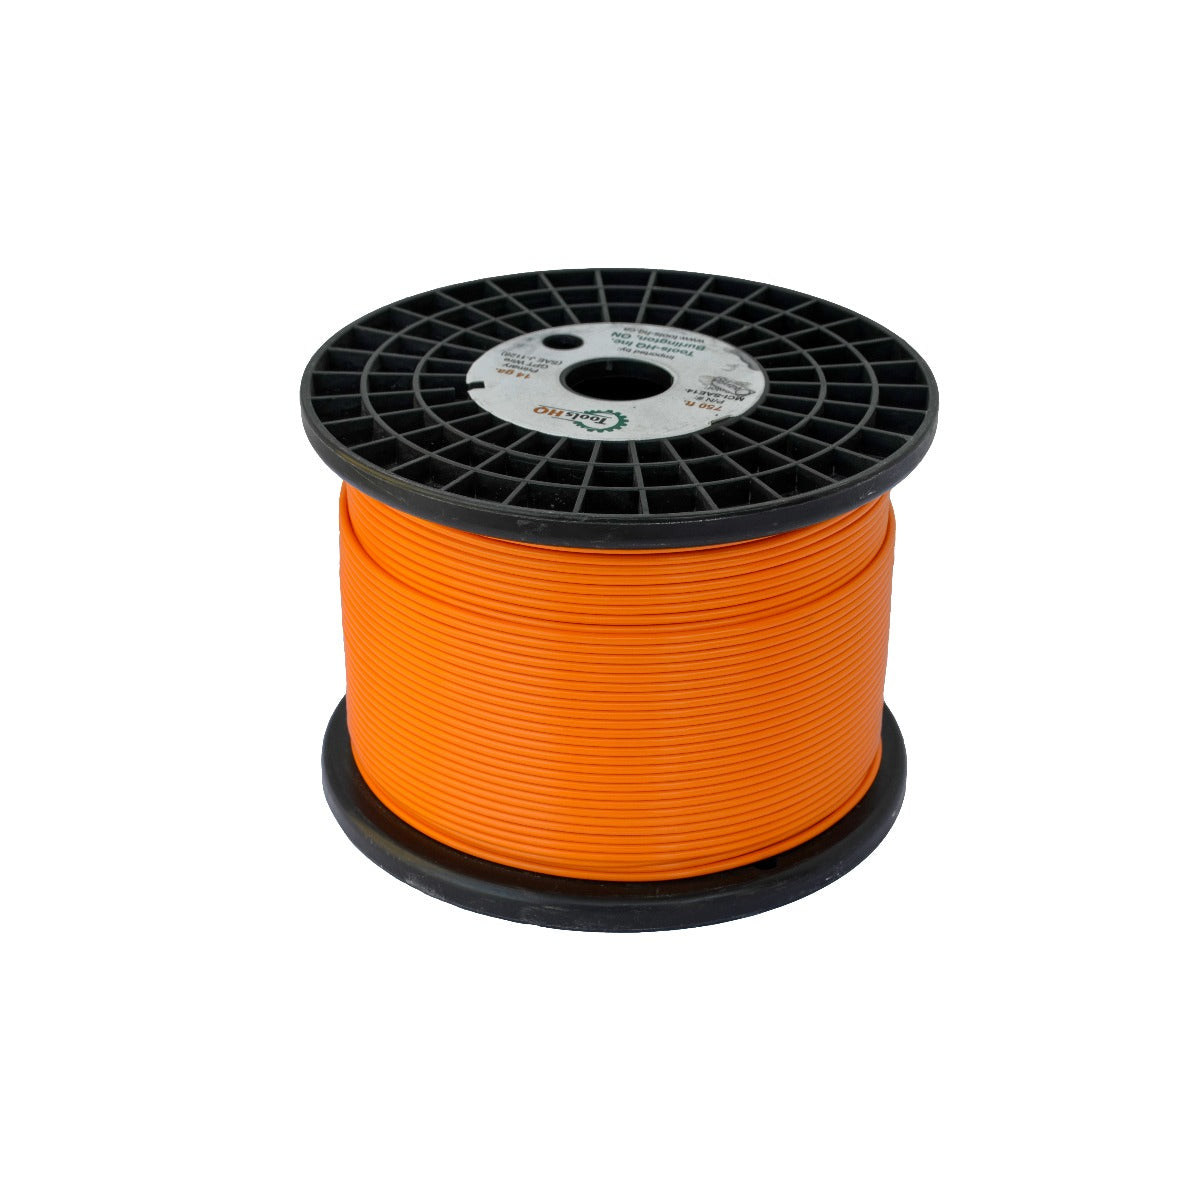 14 ga gpt electrical wire 1000 ft reel